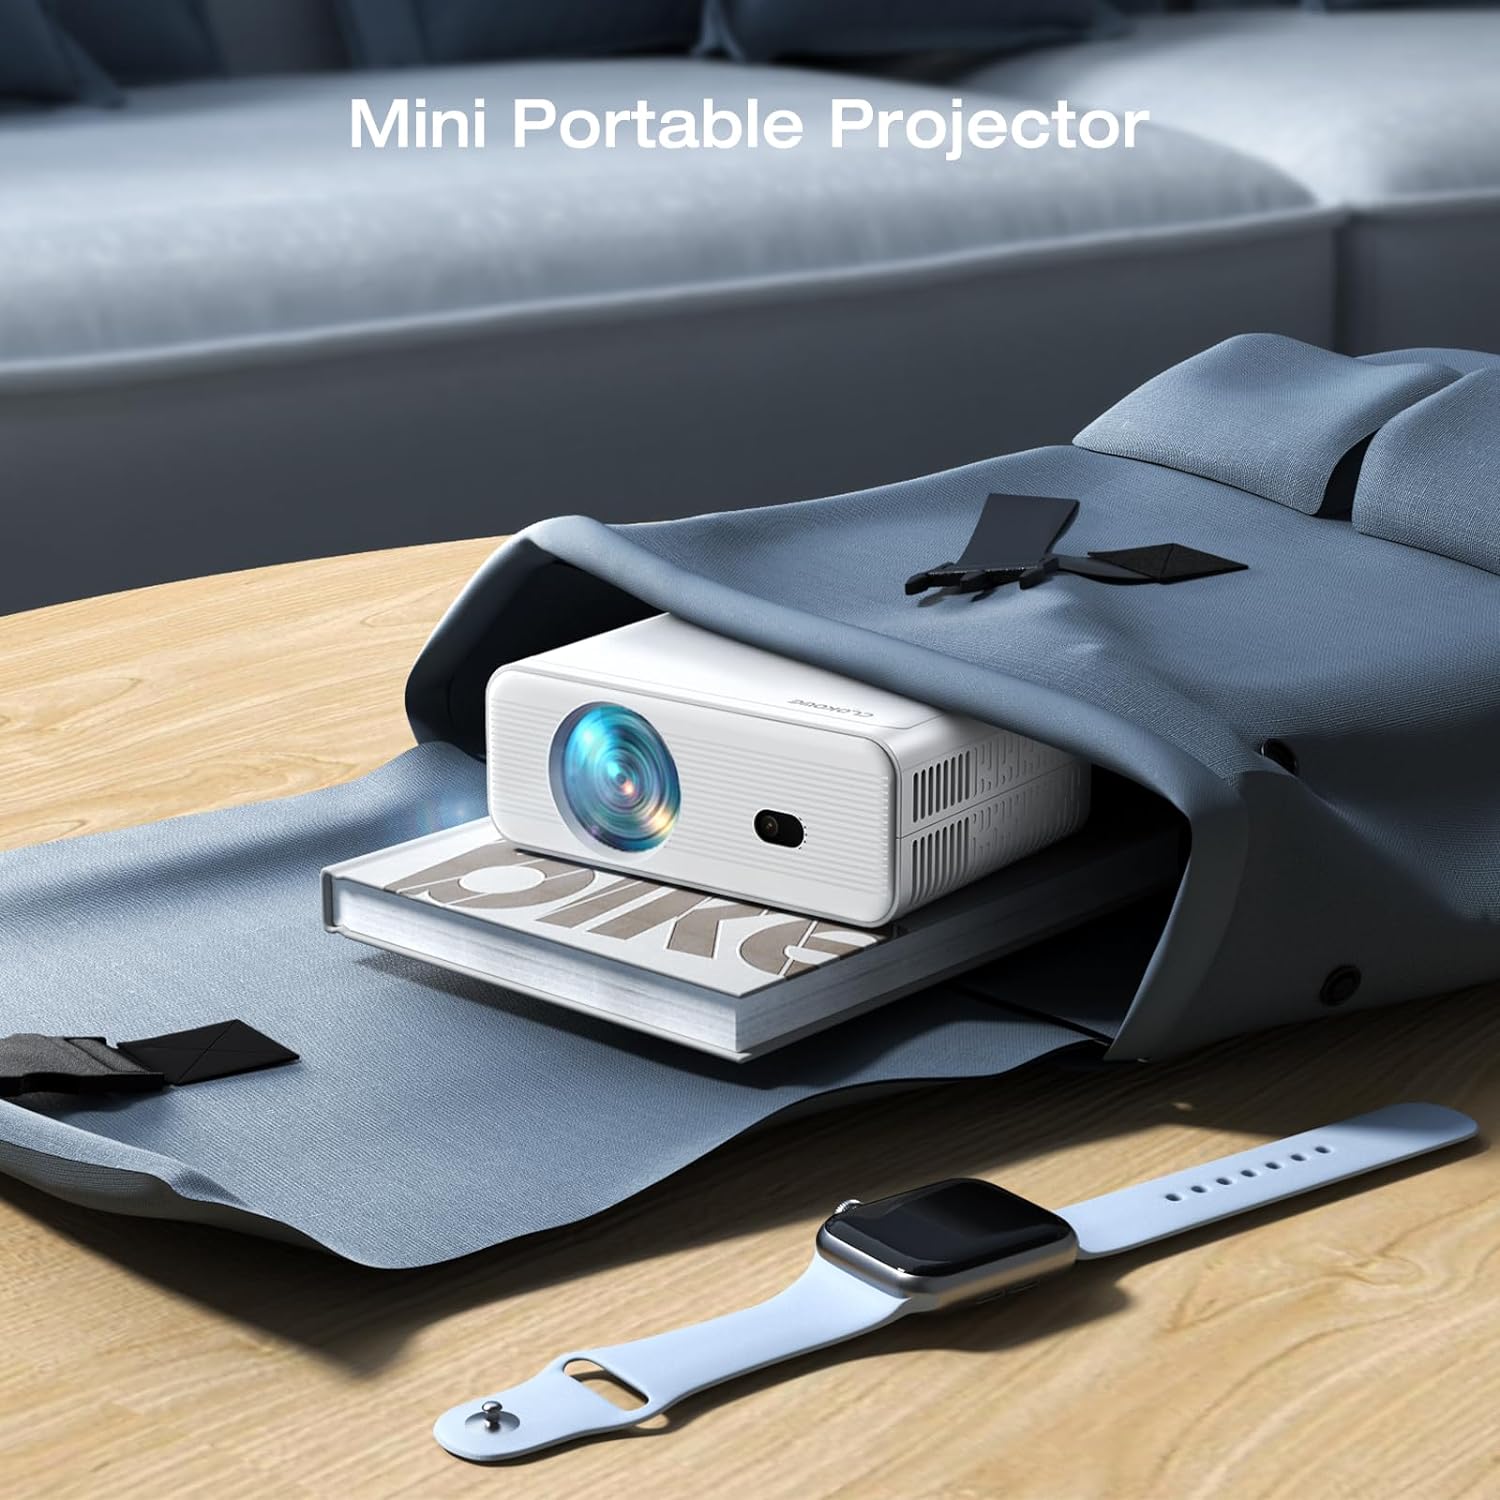 Portable Mini Projector that fits in the bag